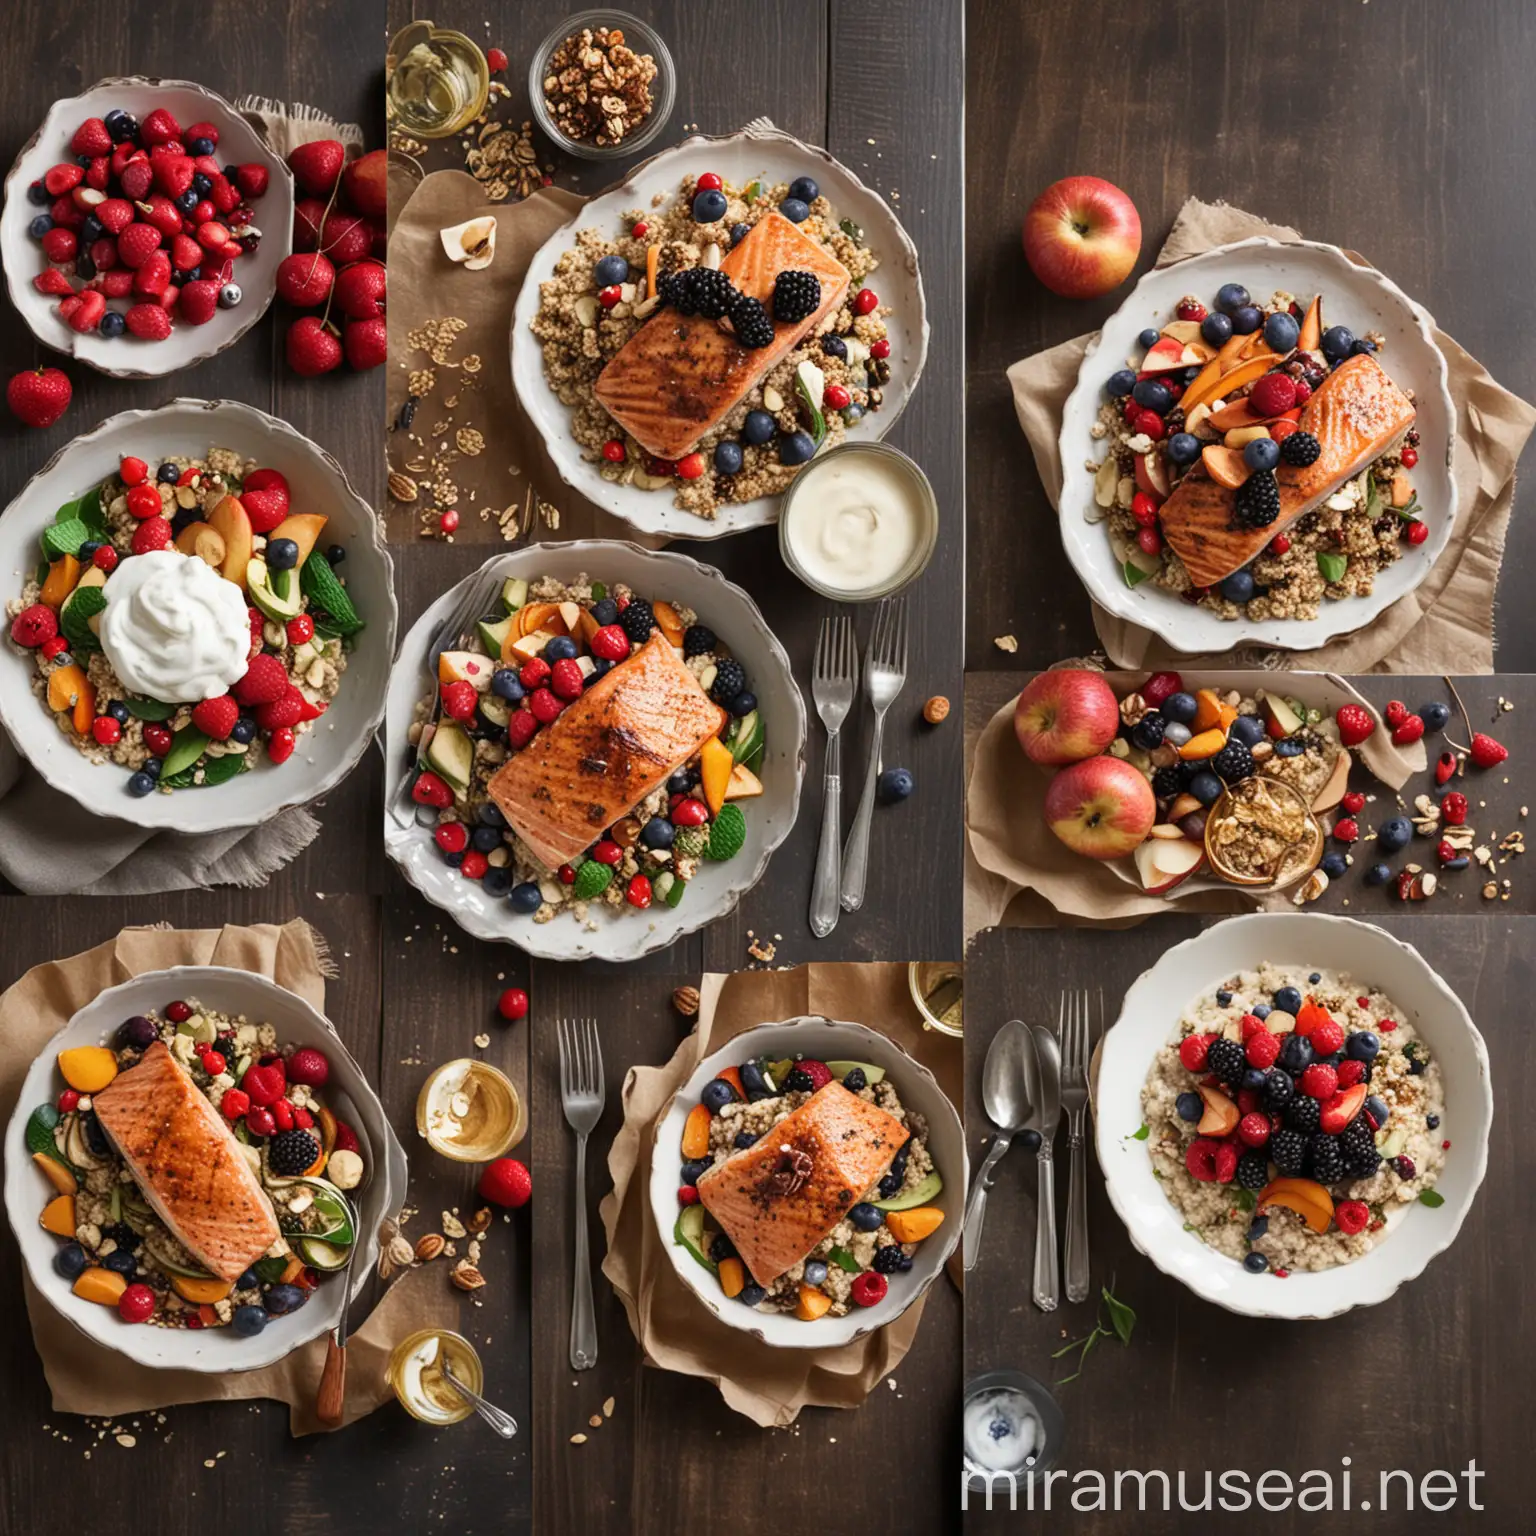 Photos of each meal: oatmeal with berries, quinoa salad, grilled salmon with vegetables, Greek yogurt with honey and nuts, baked apples with cinnamon.